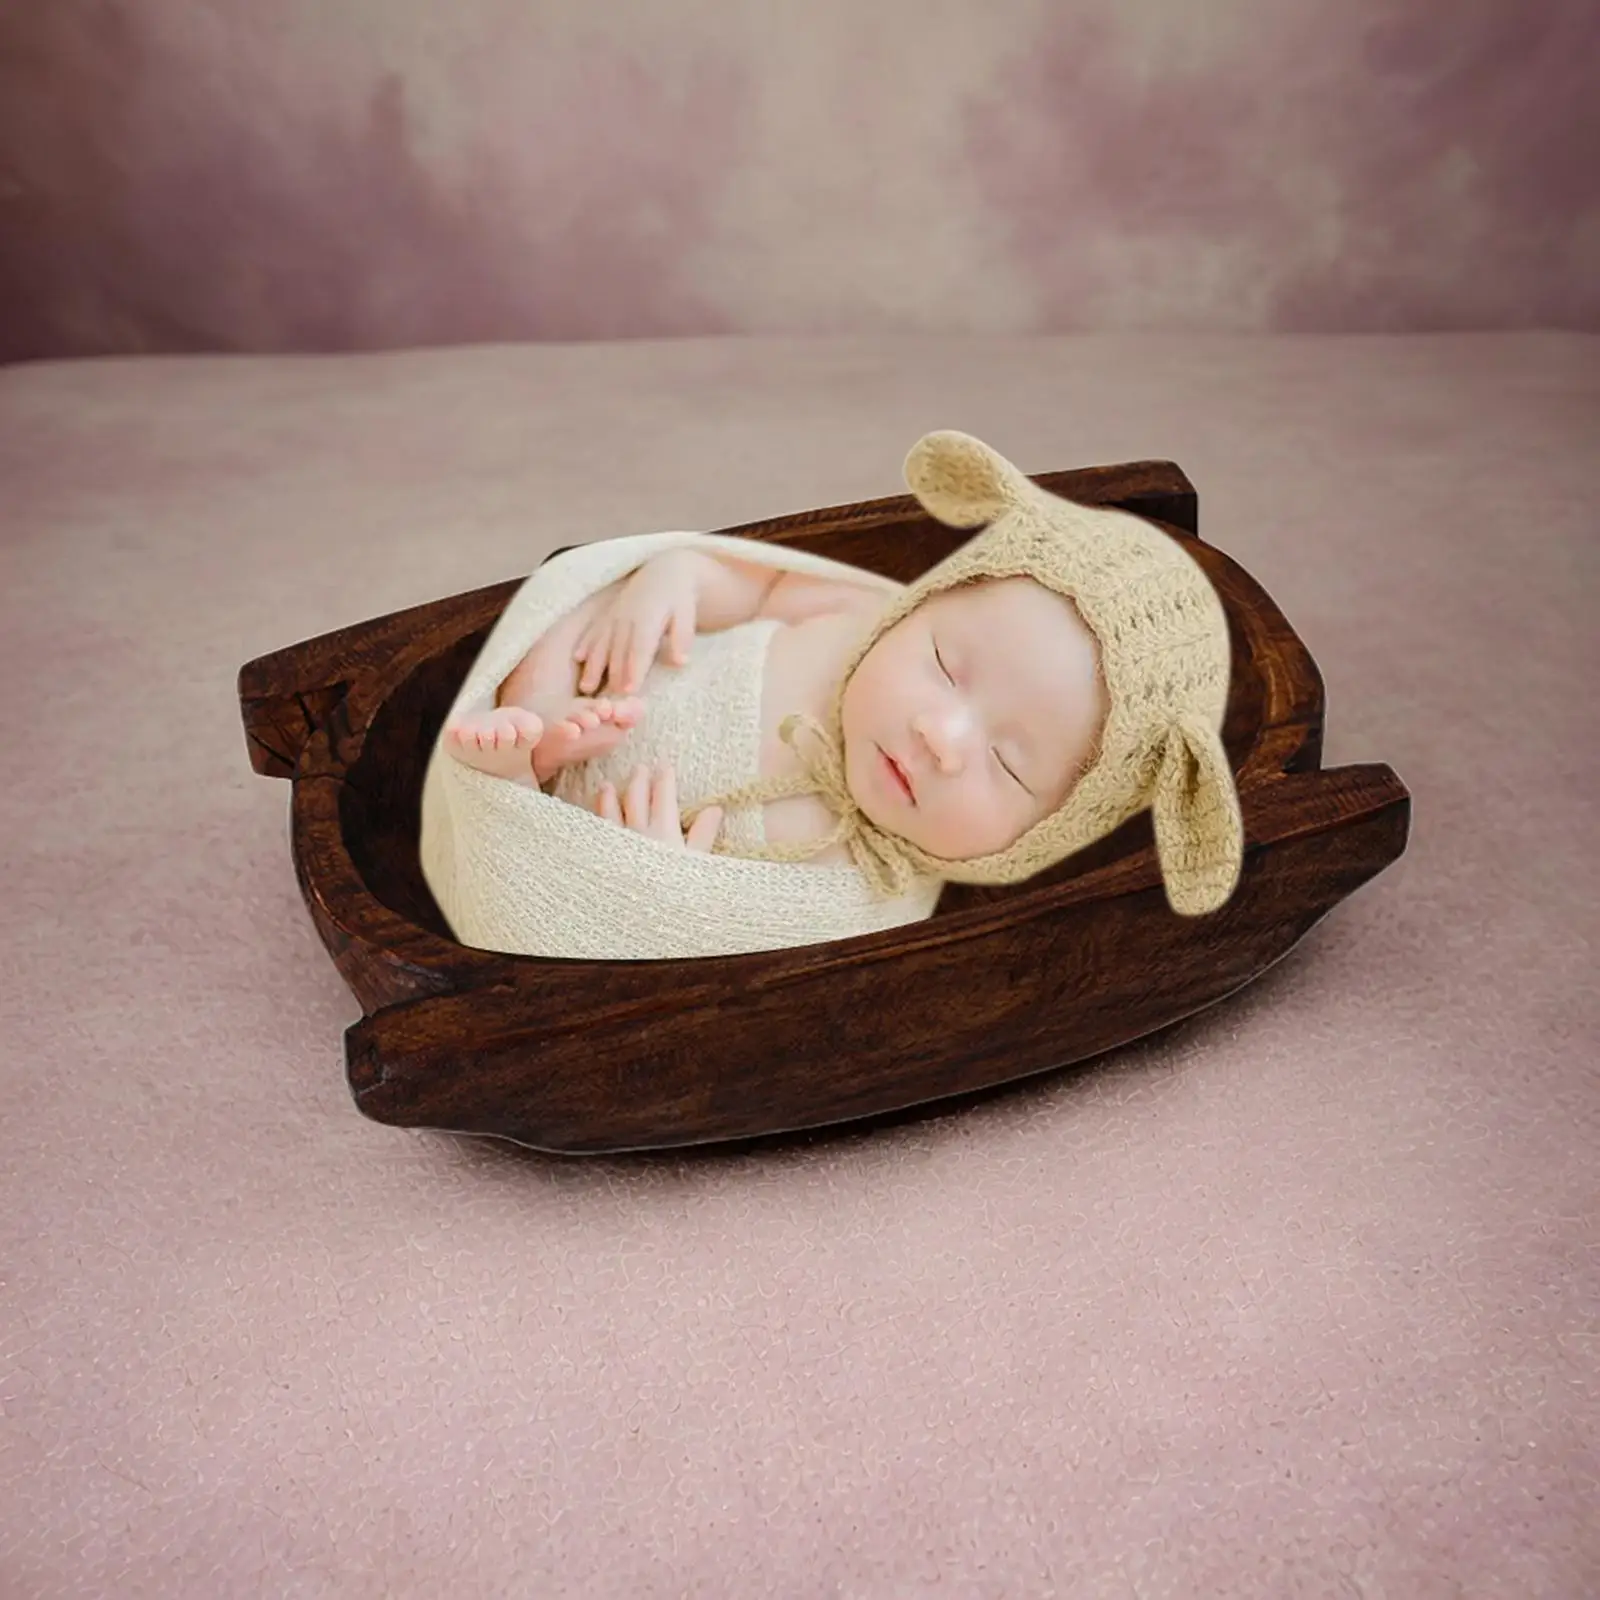 Baby Photo Props Wooden Basin Decor Vintage Mini Couch Accessory Seat Baskets Bed for Newborn Baby Shower Baby Girls Boys Party